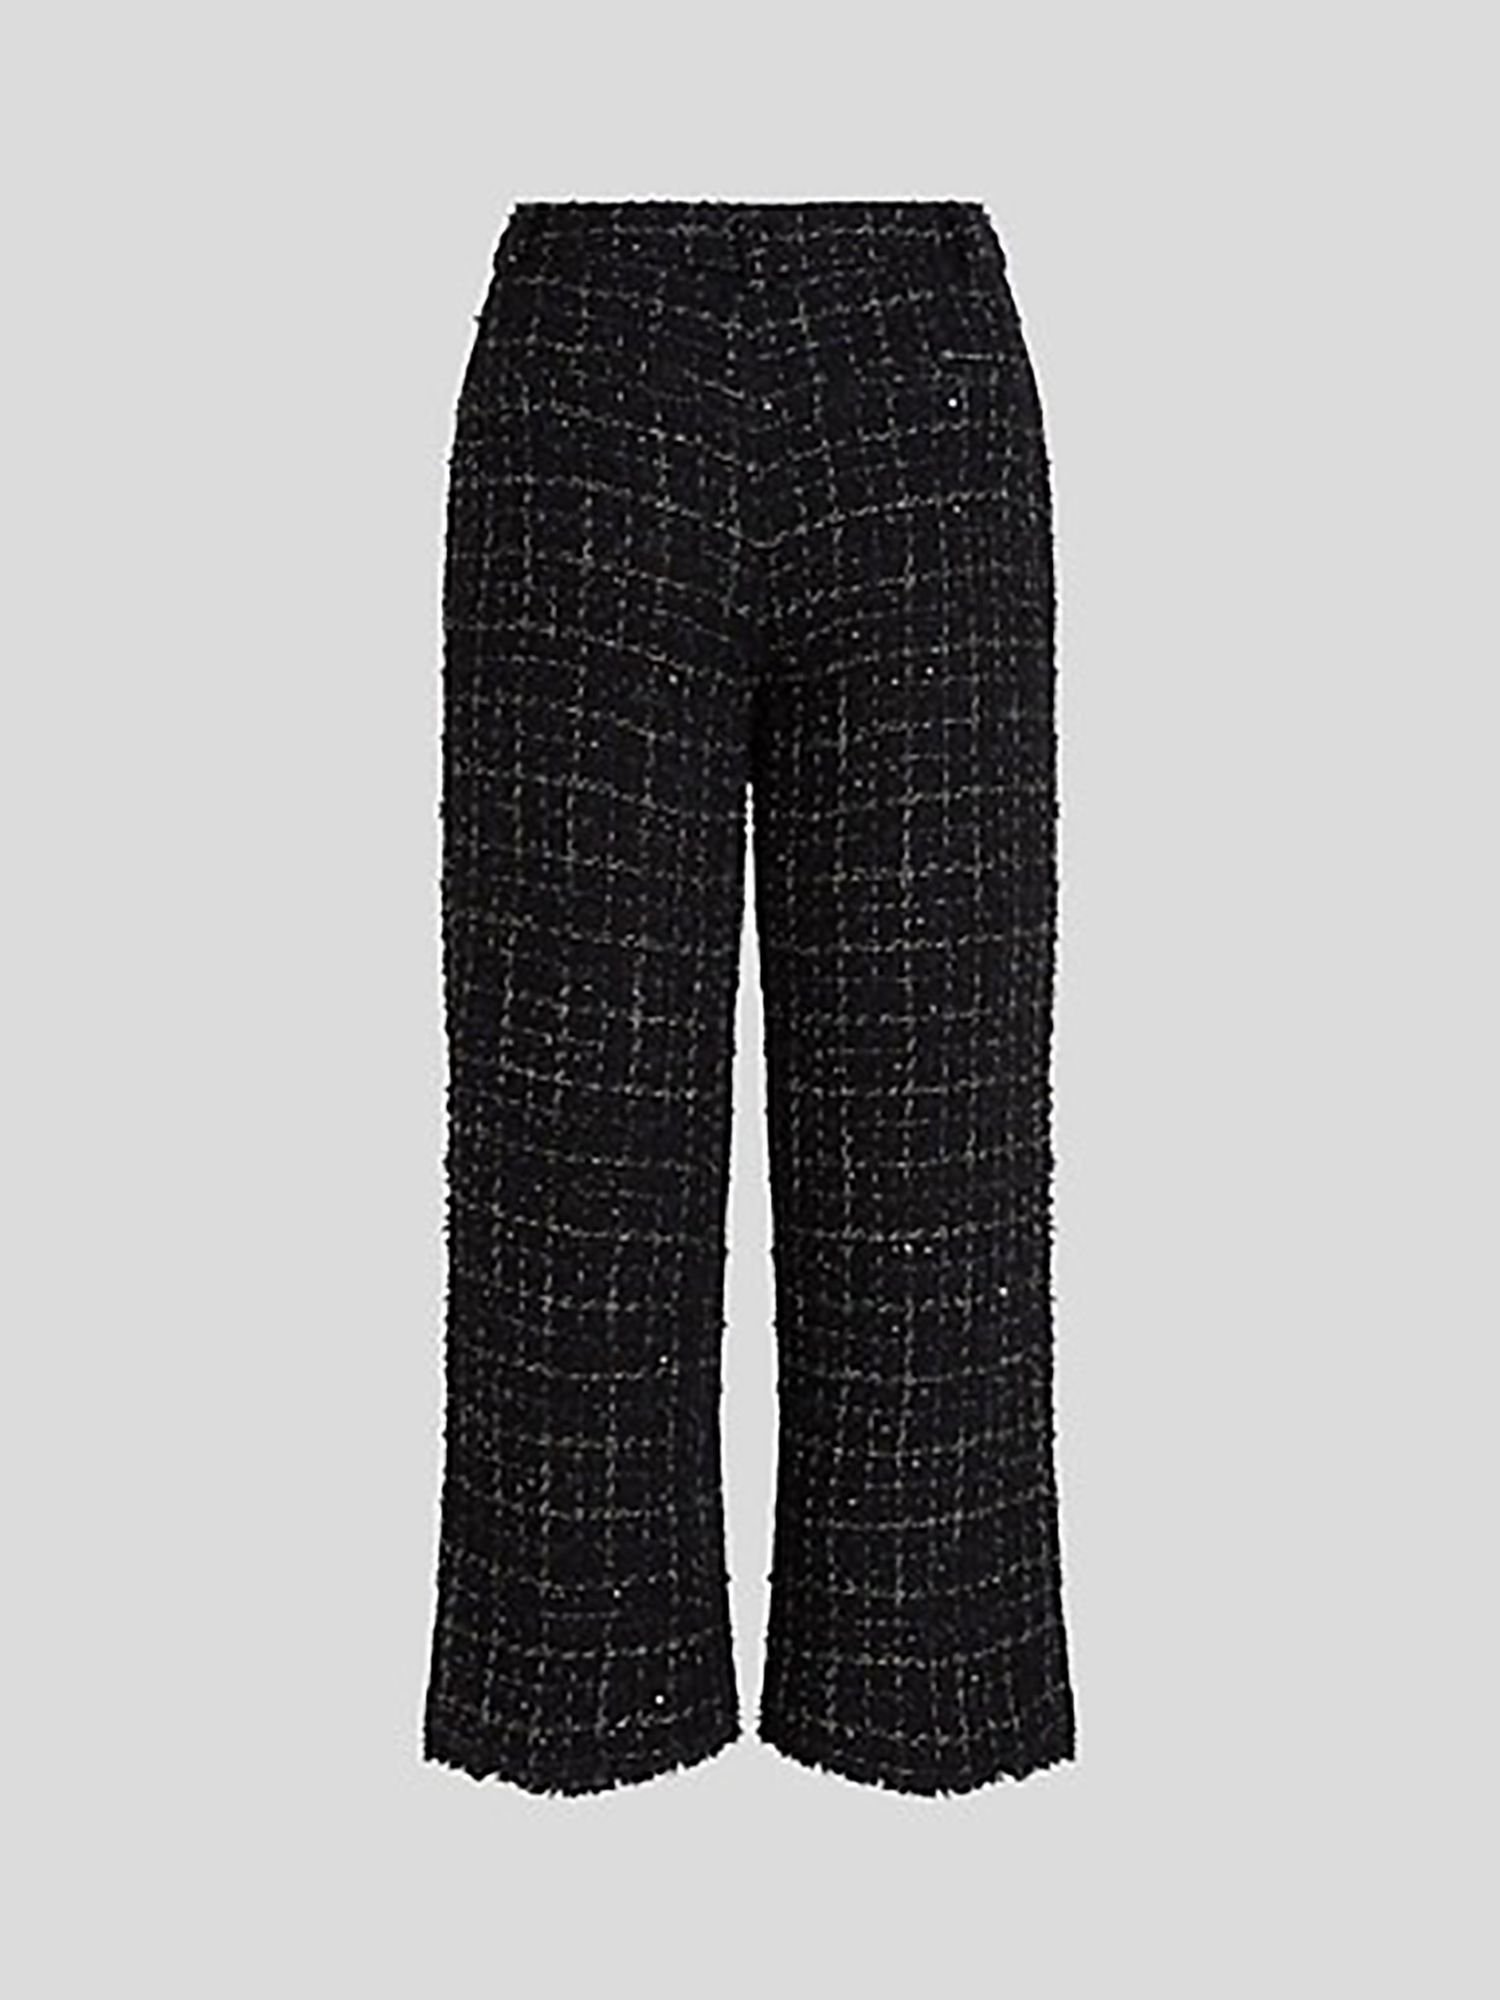 KARL LAGERFELD Check Boucle Trousers, Black/Silver, 6